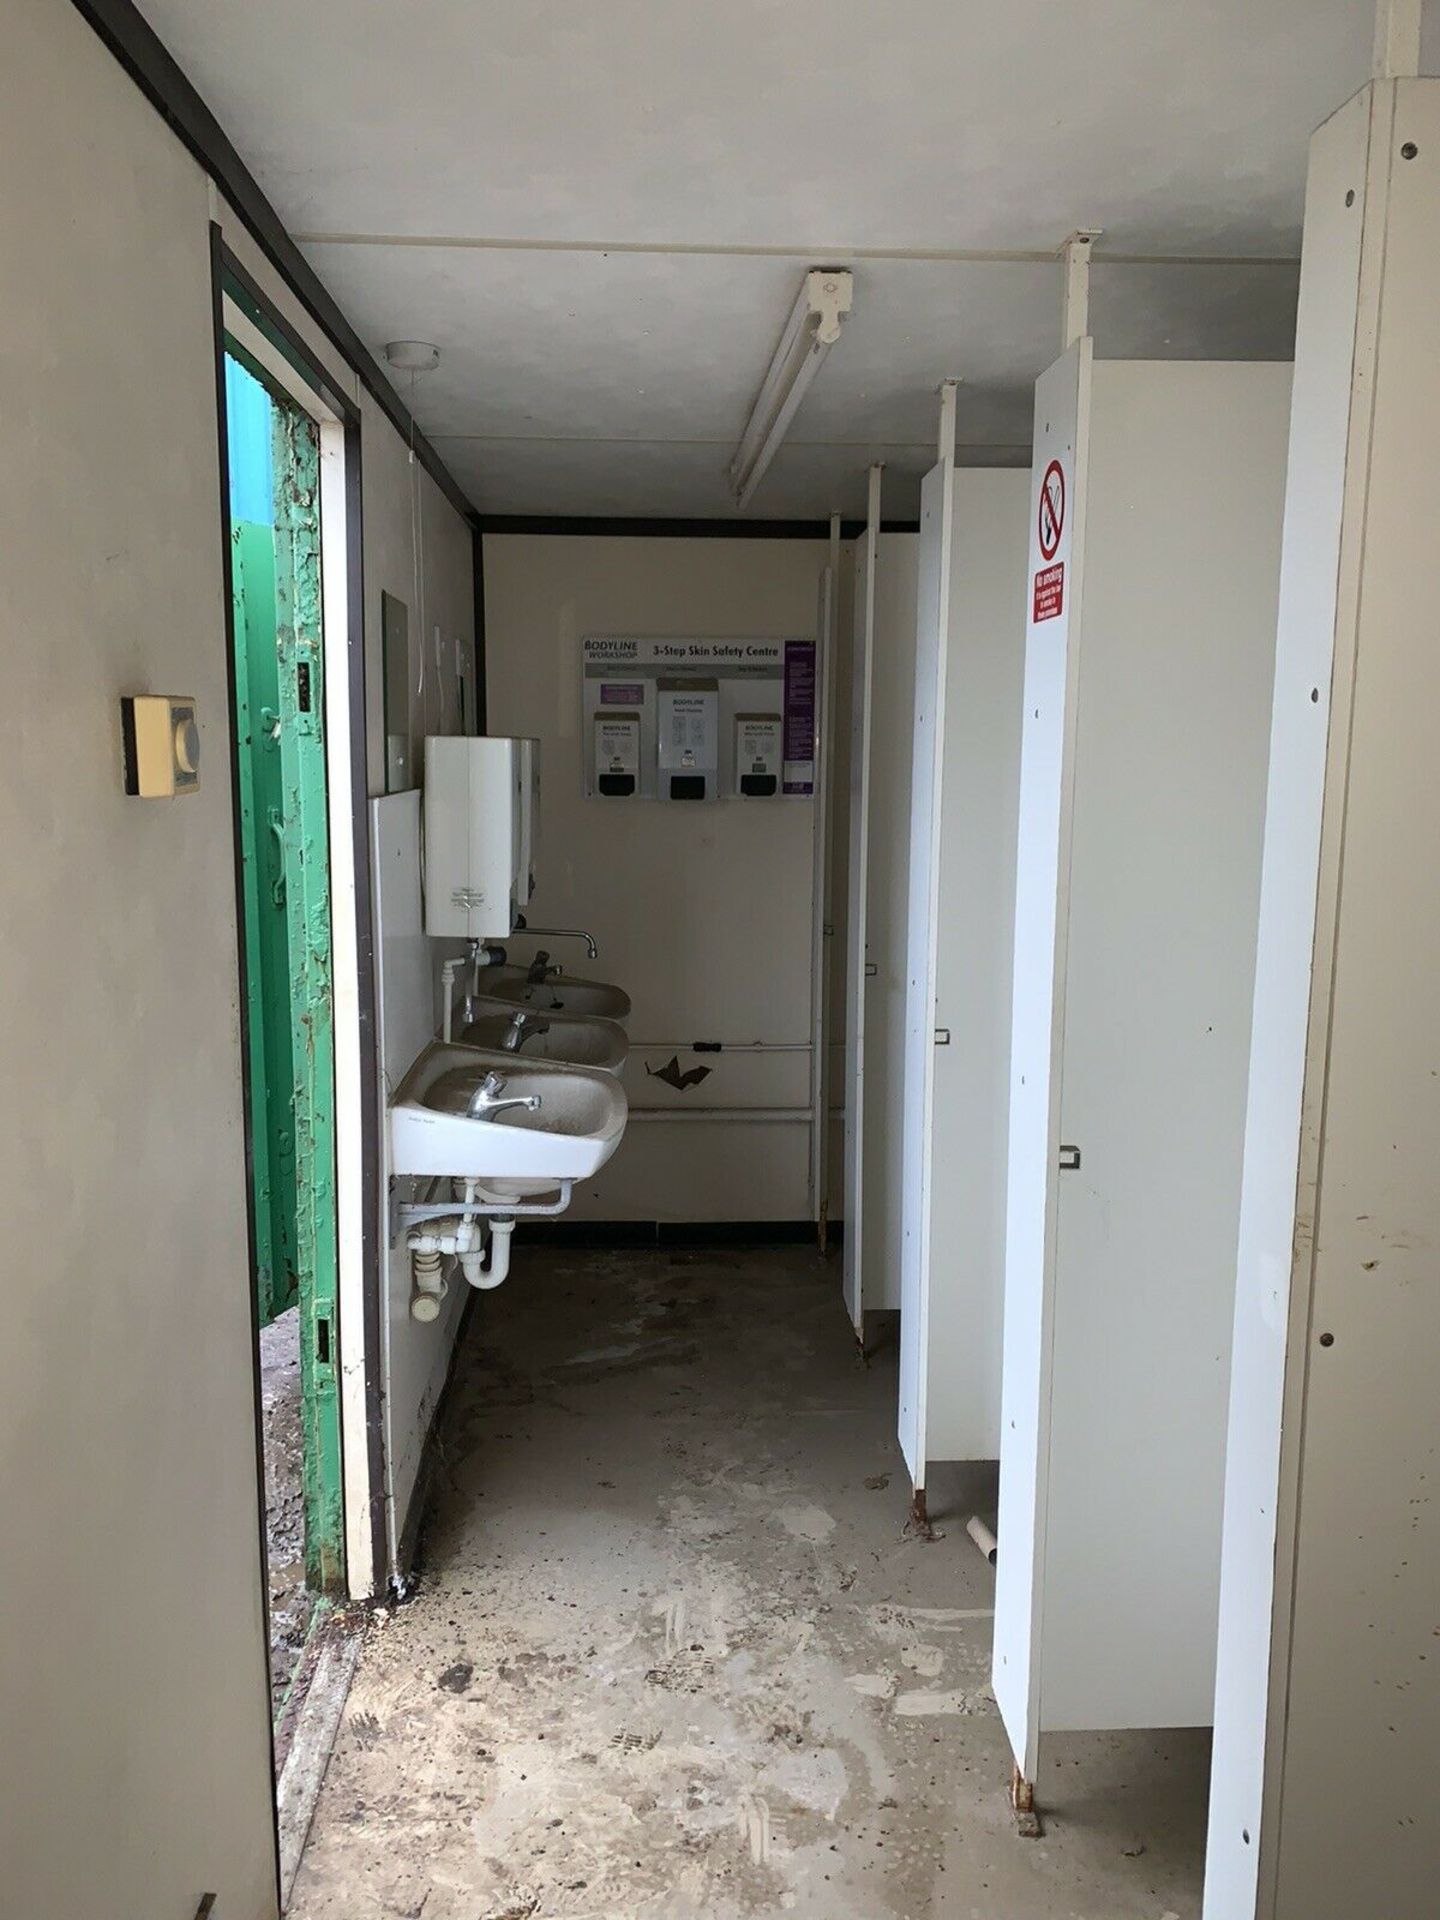 Portable Toilet Block With Shower - Image 9 of 10